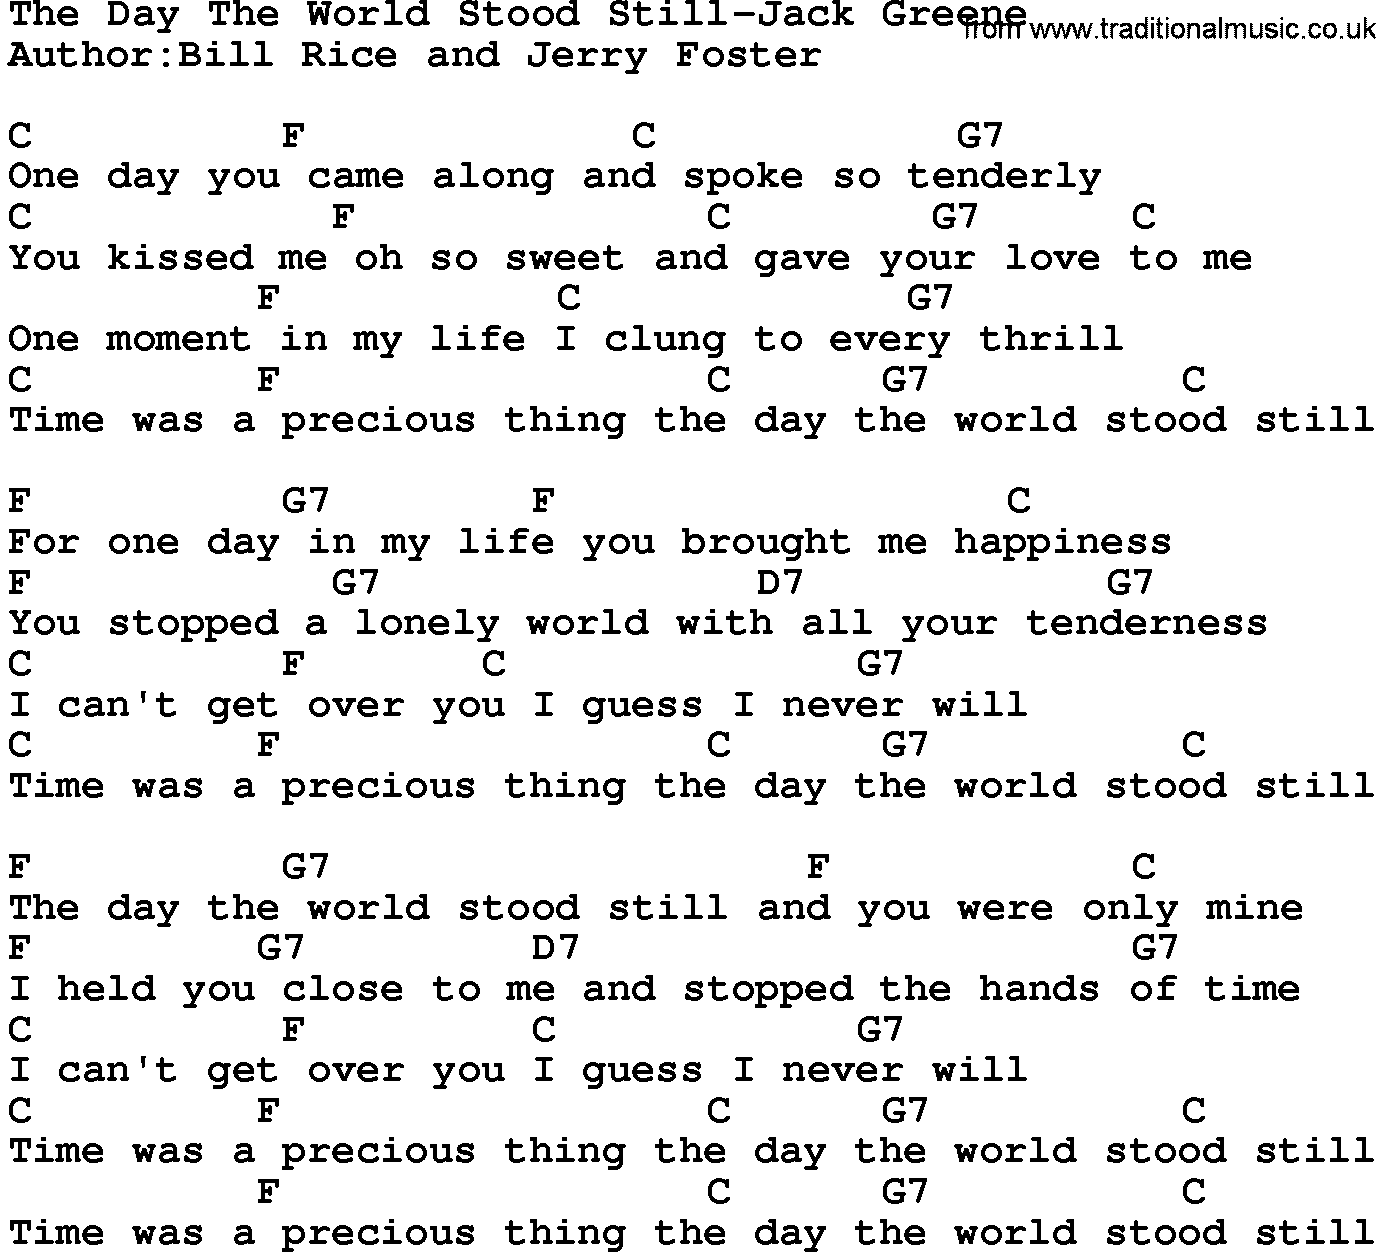 Country music song: The Day The World Stood Still-Jack Greene lyrics and chords